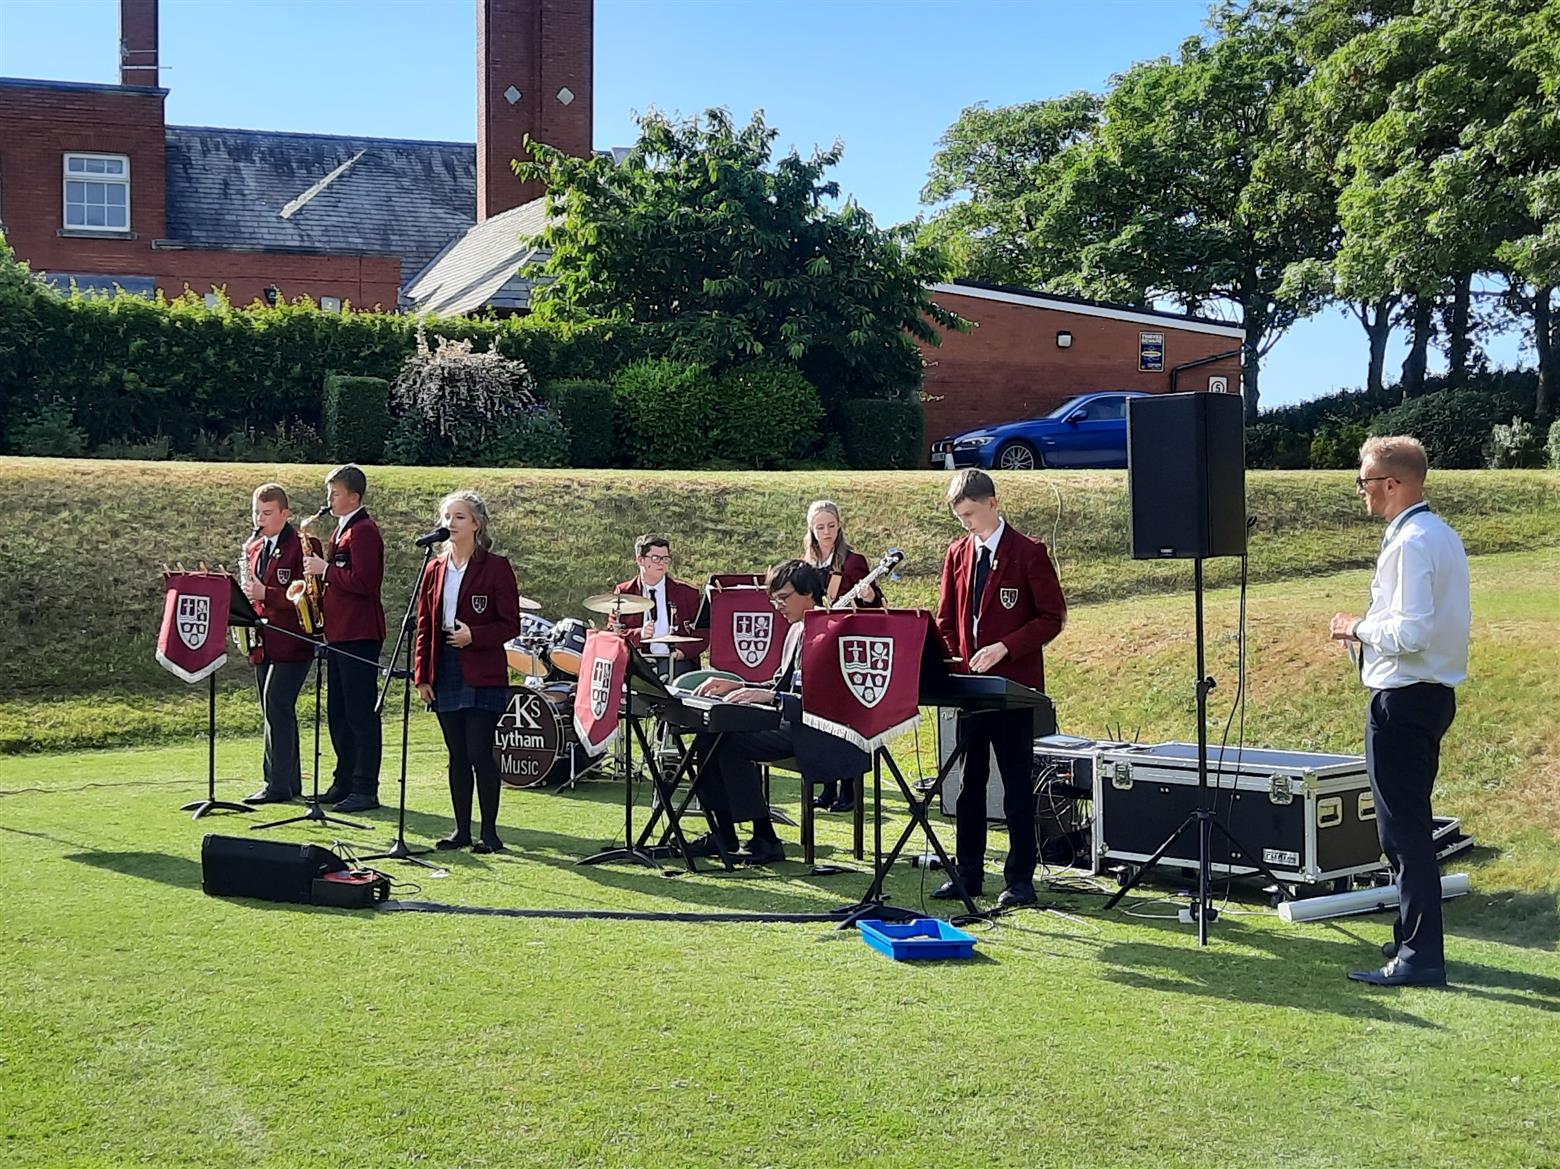 Afternoon Teatime concert in the sunshine